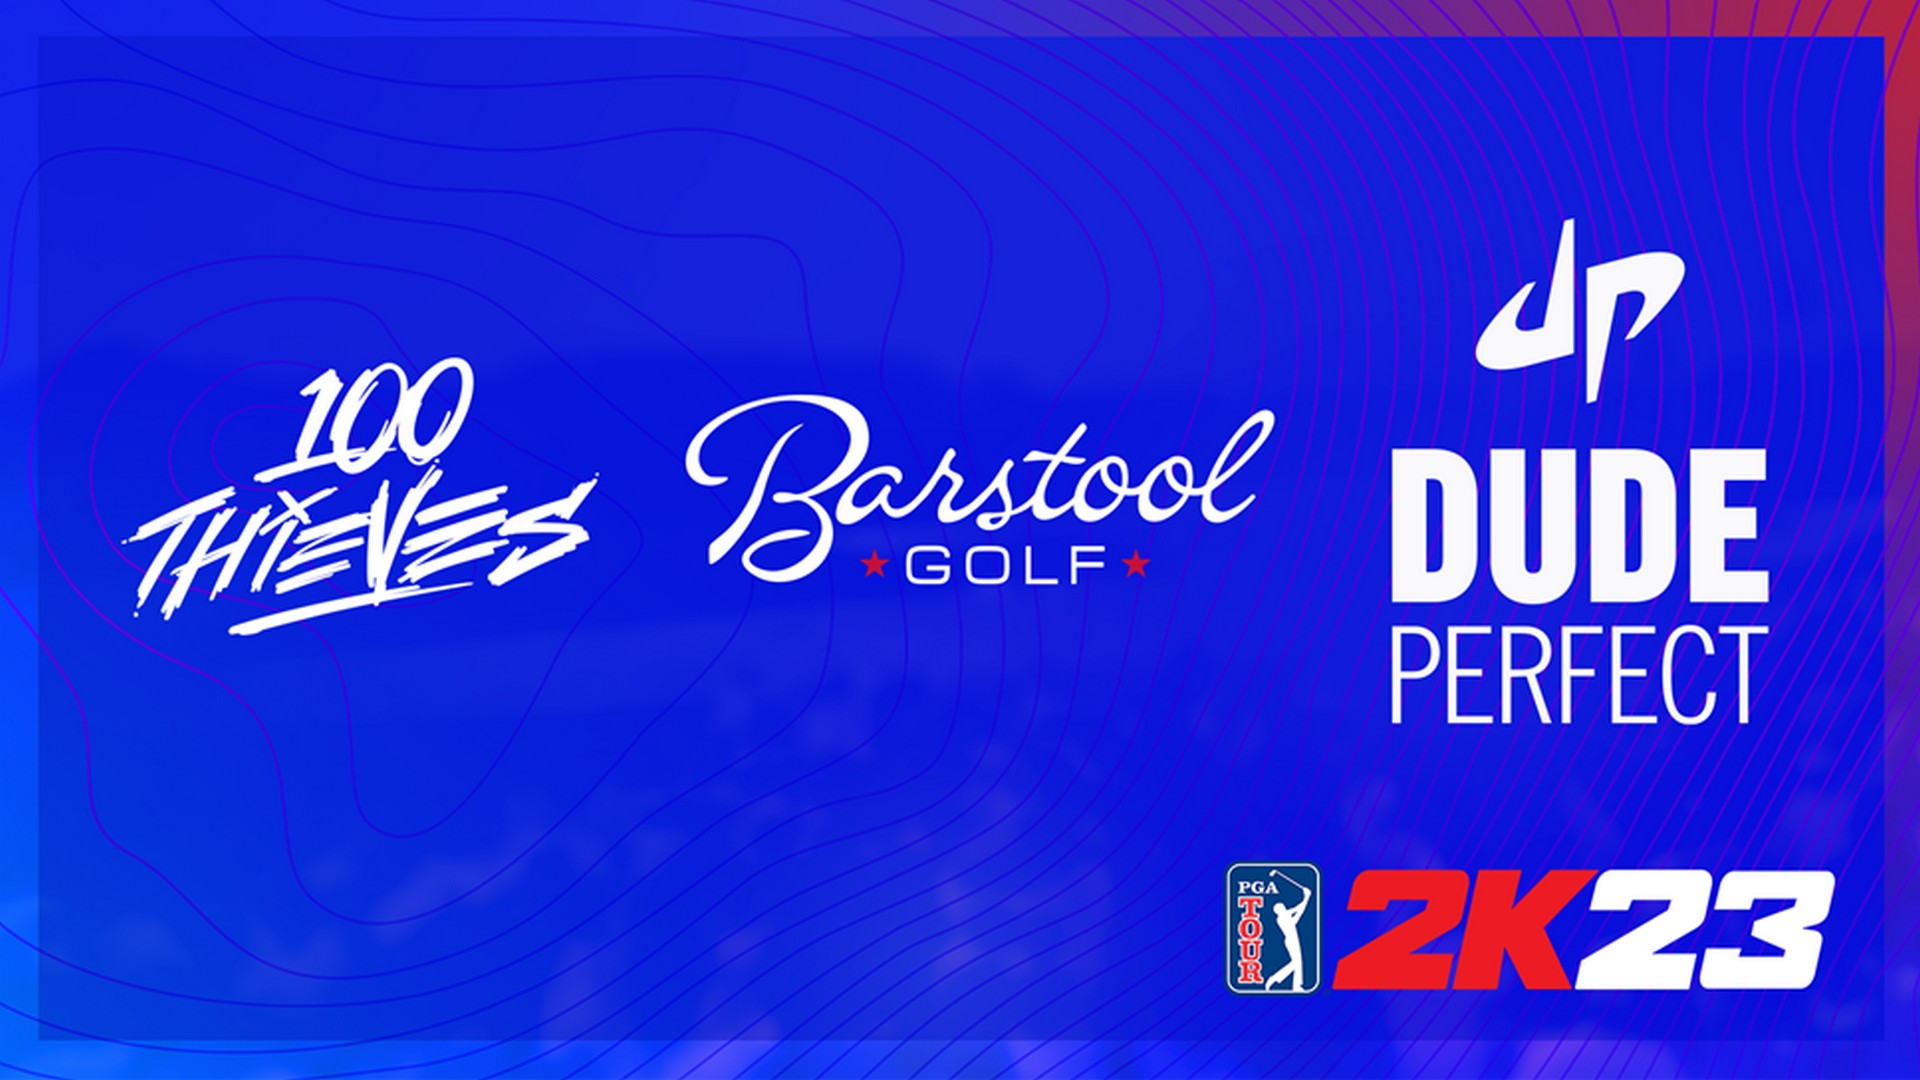 Barstool Sports, Dude Perfect, and 100 Thieves To Bring Lifestyle Flair To PGA TOUR 2K23